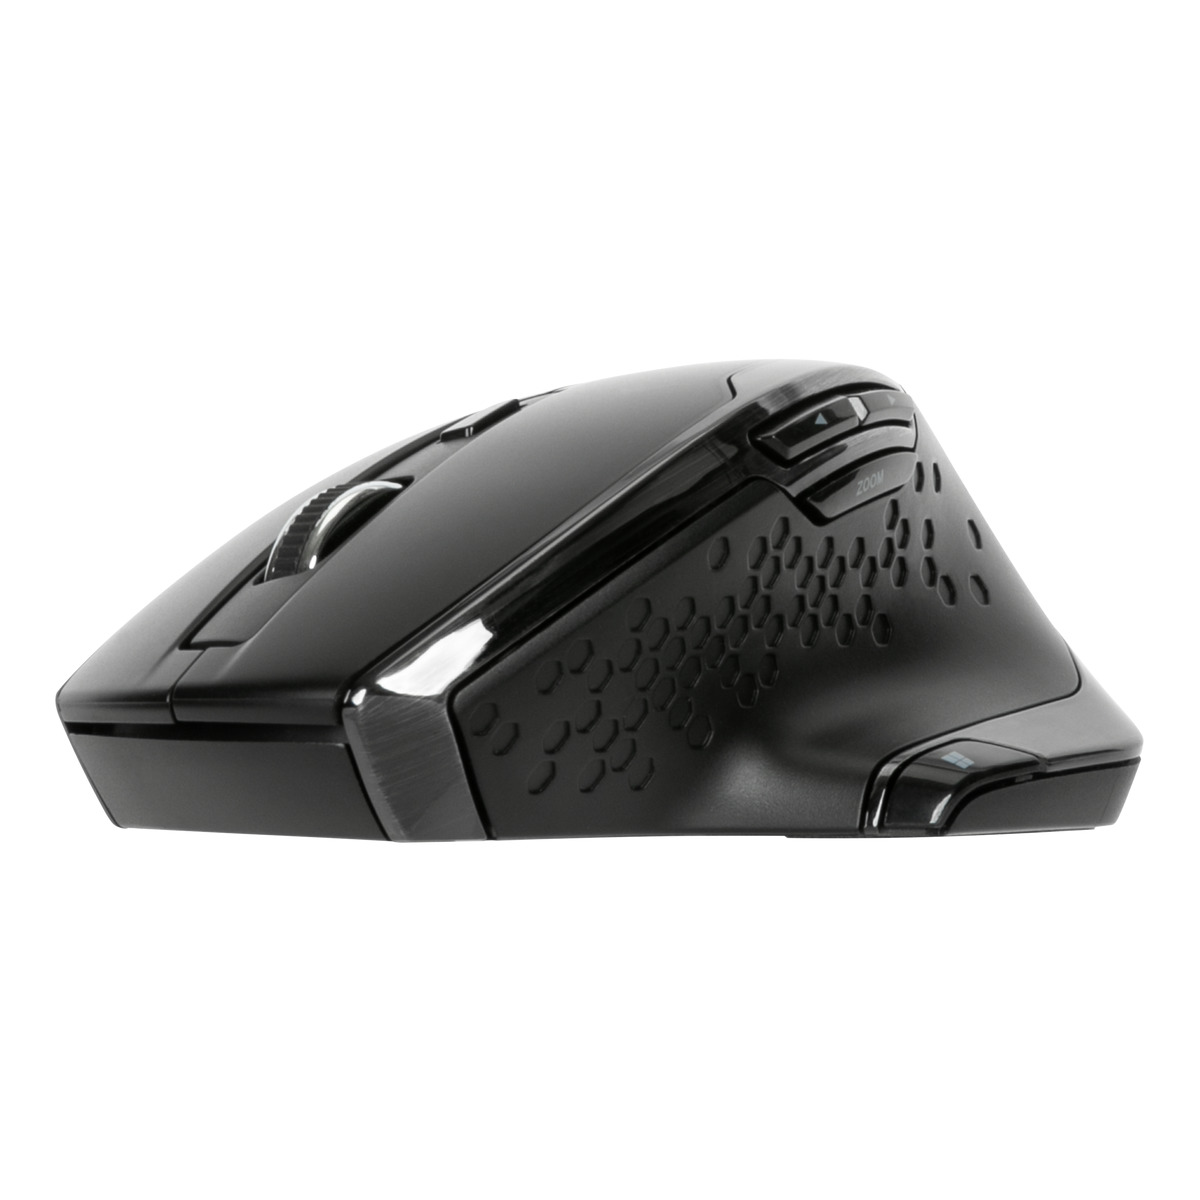  - Mouse inalmbrico antimicrobial blue Trace Targus 5